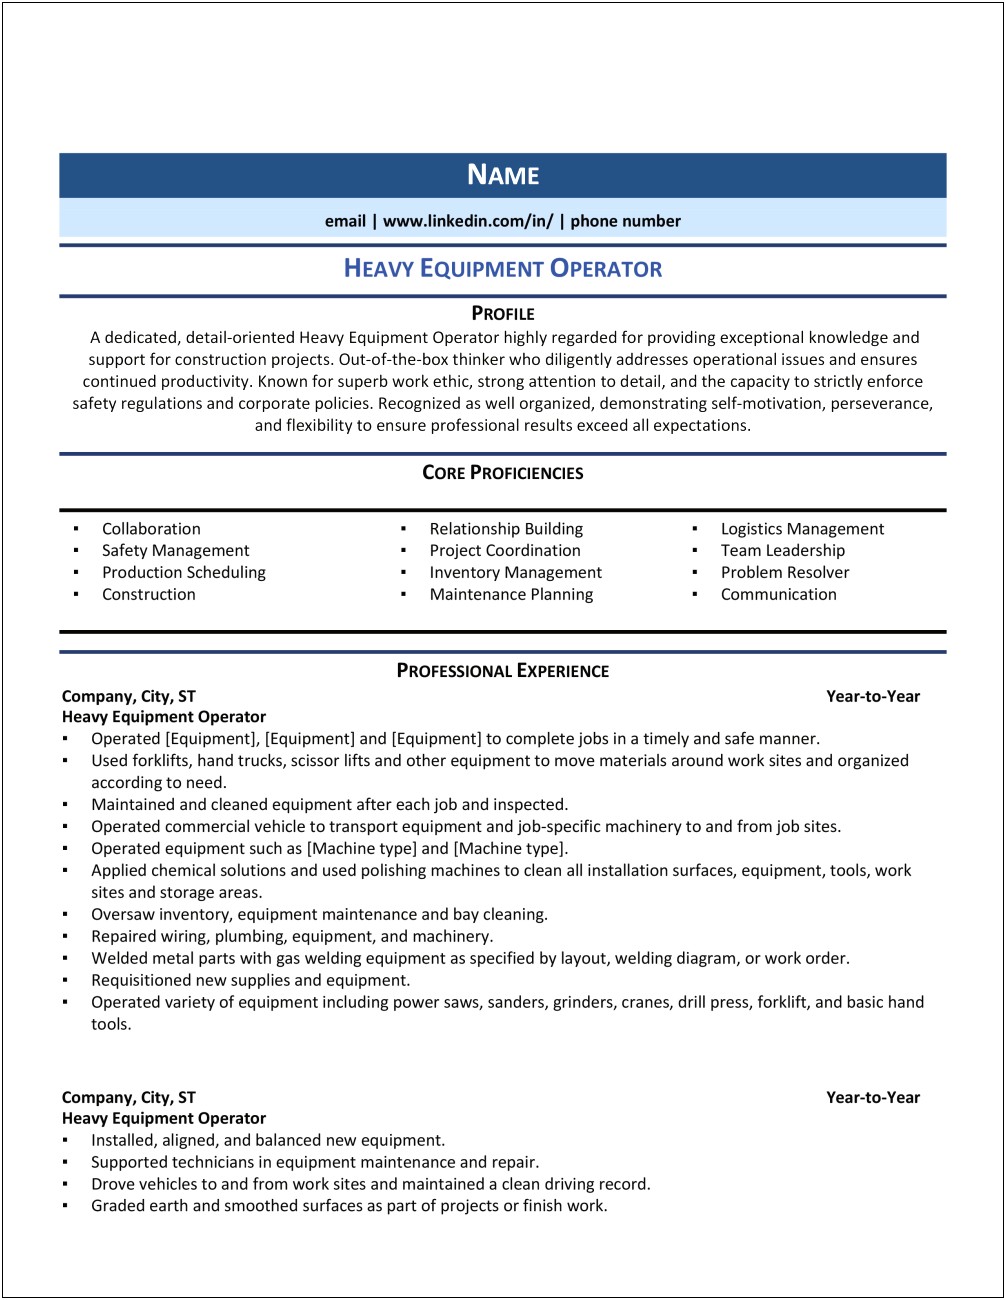 Sample Objective For Job Resume With Heavy Equipment